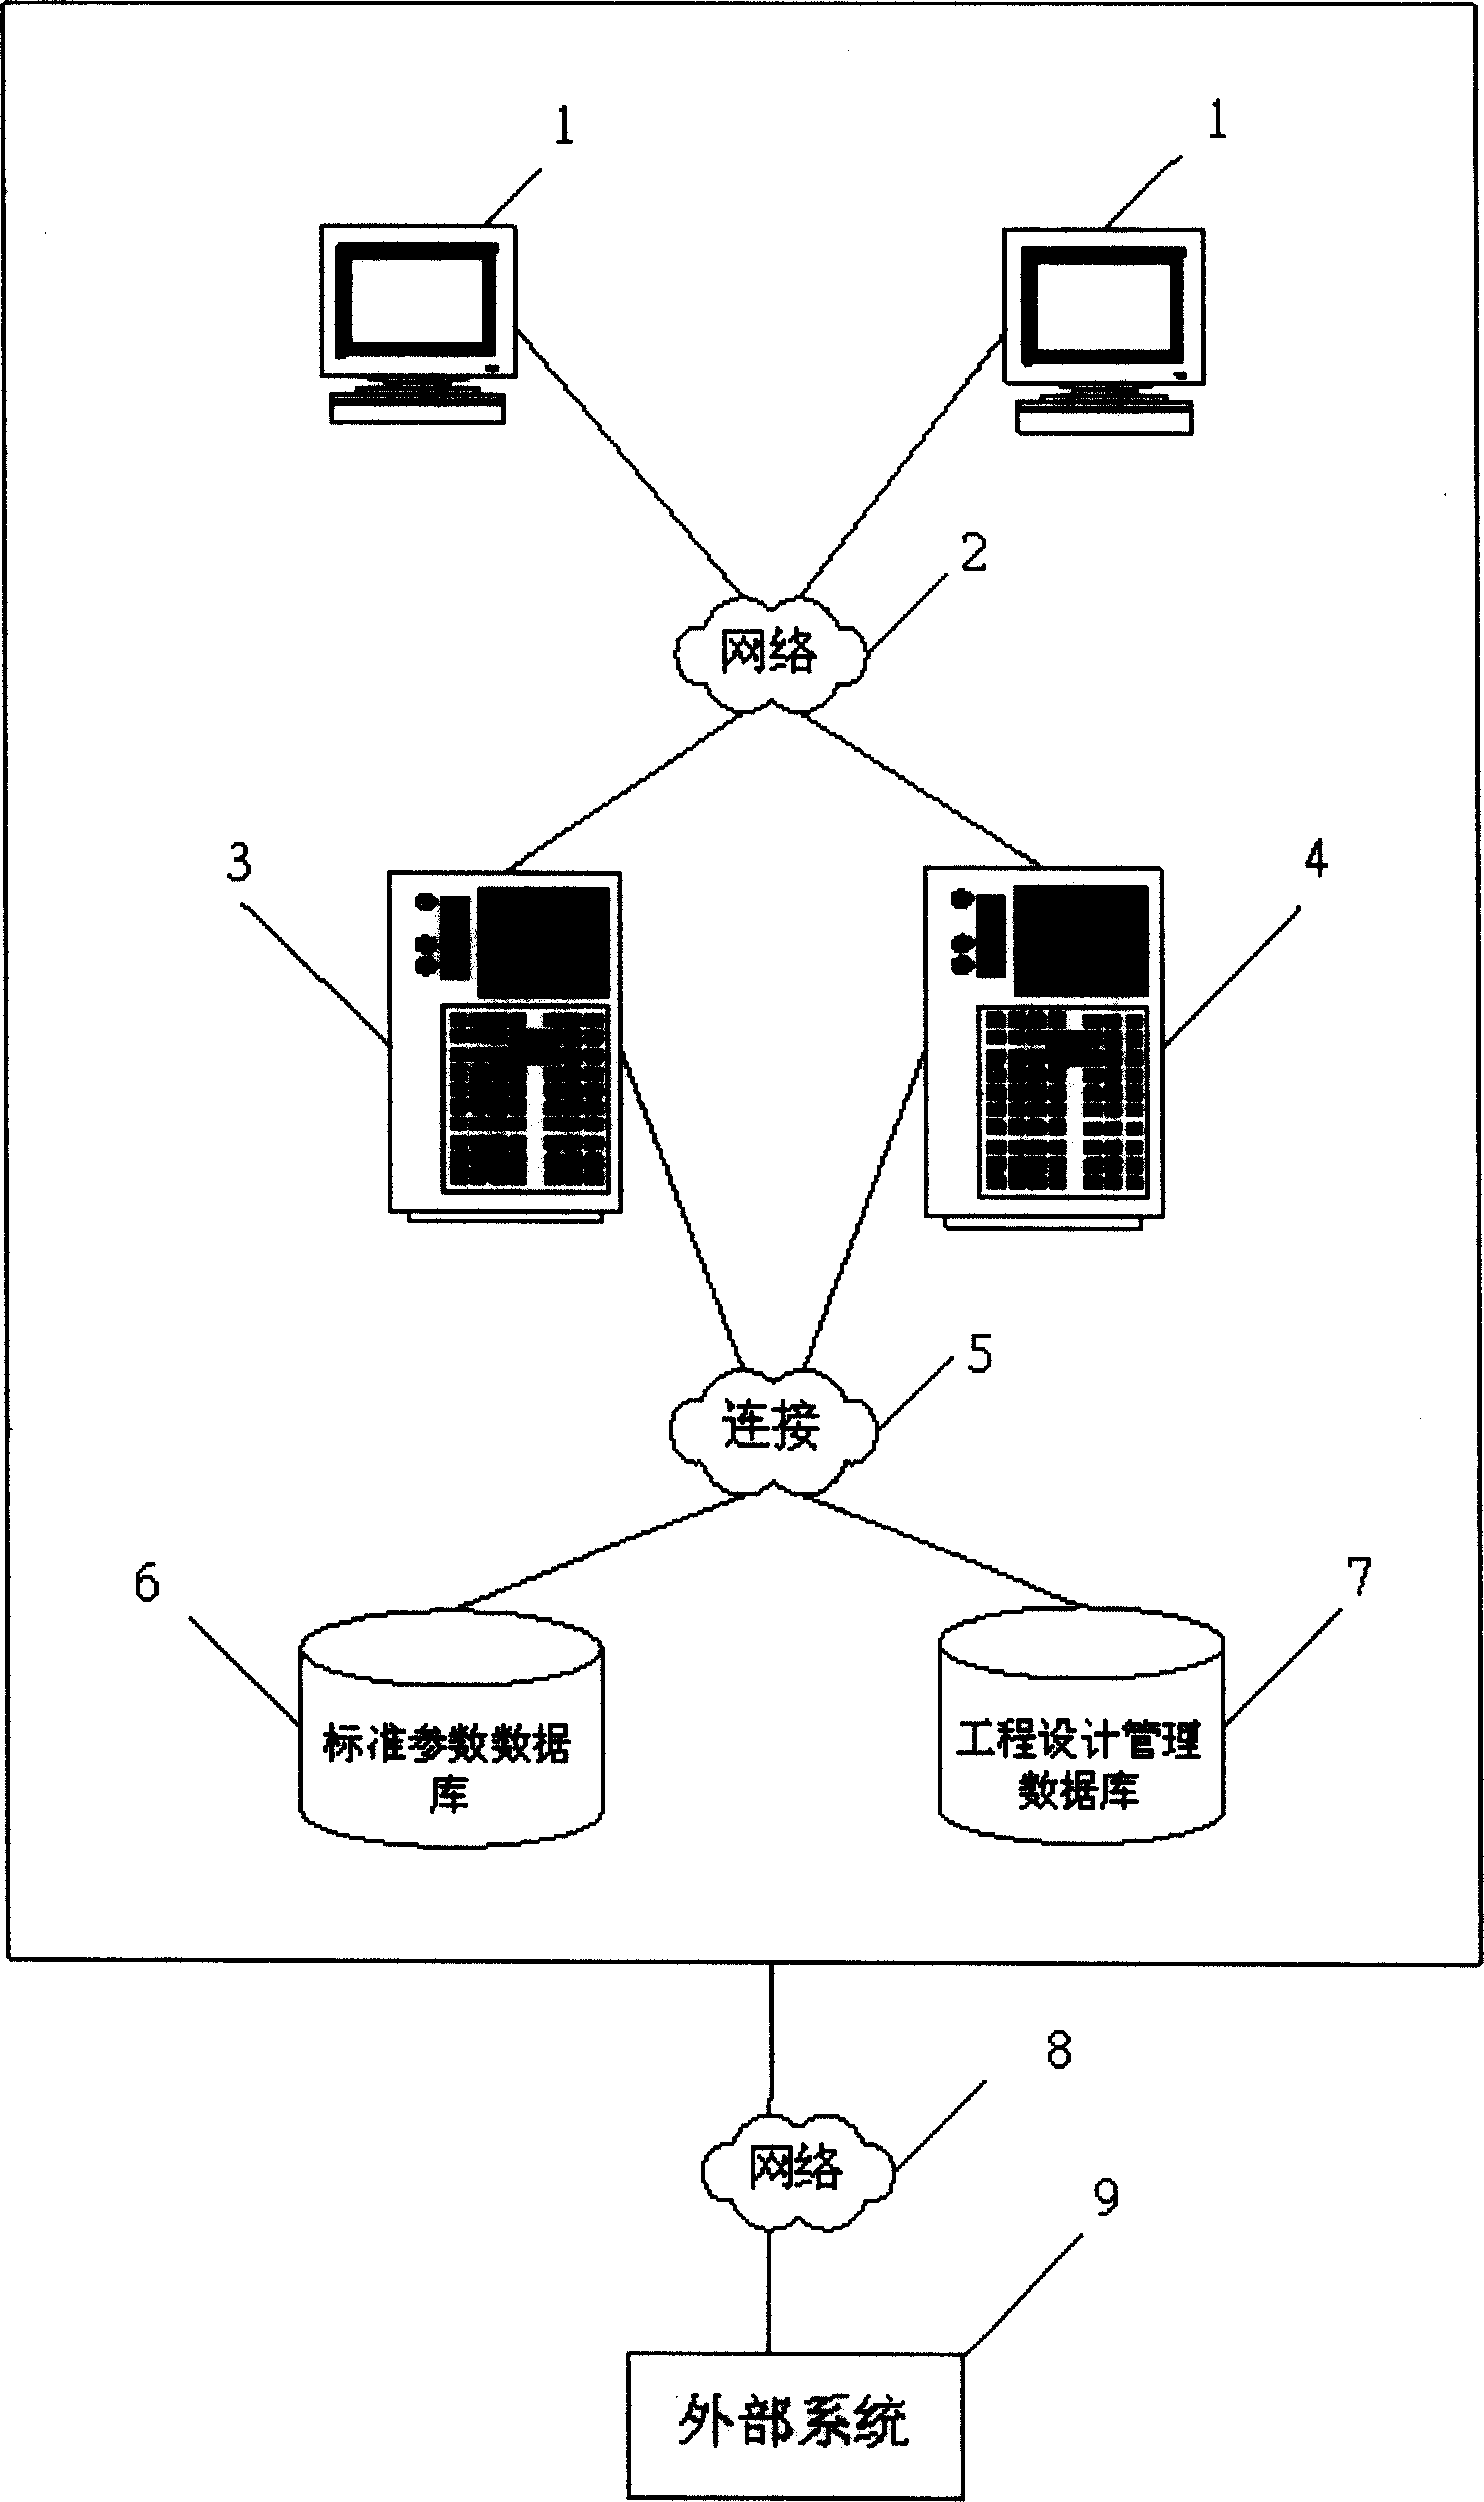 Sheet-metal piece engineering design management system and method